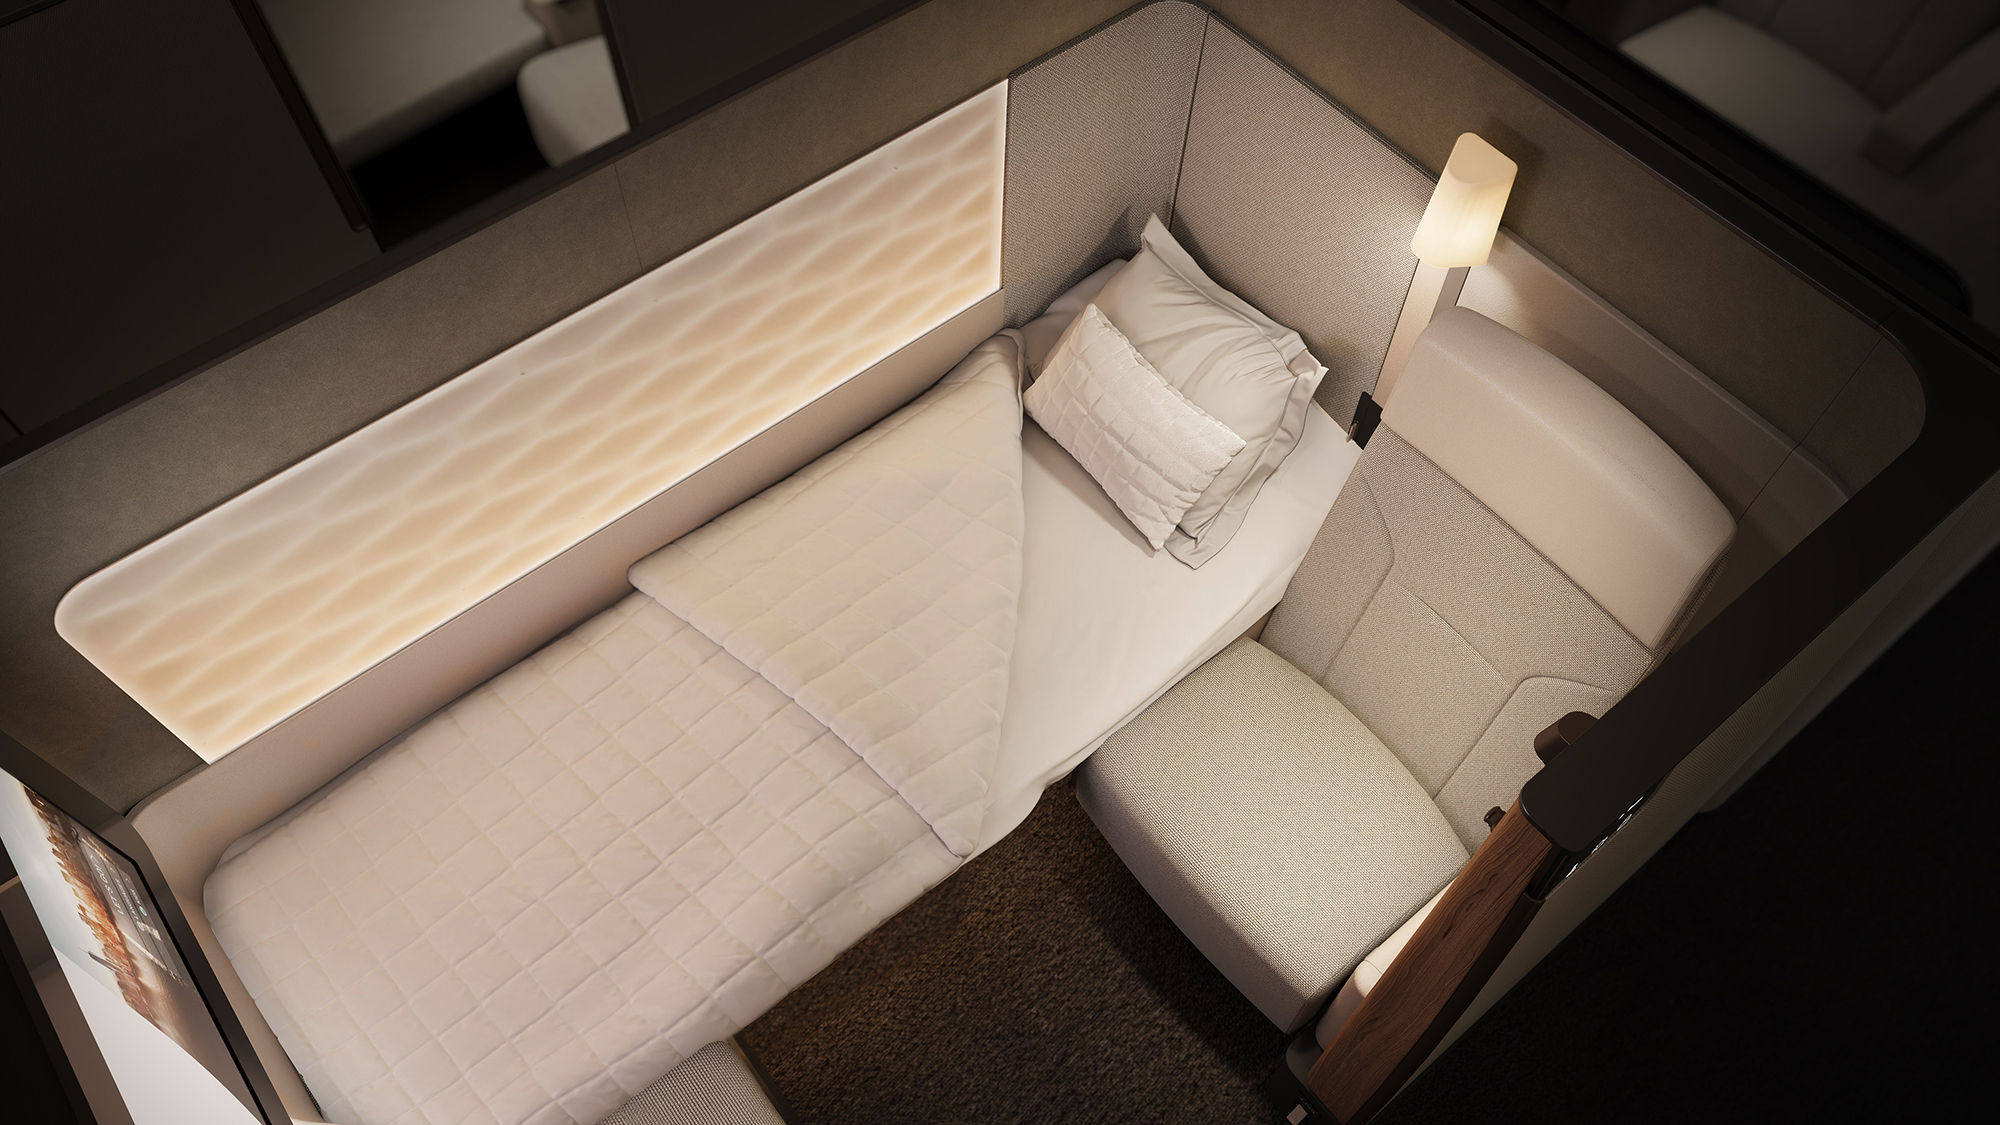 An overhead view of the Luxe First suite on Qantas' Airbus A350-1000 aircraft.